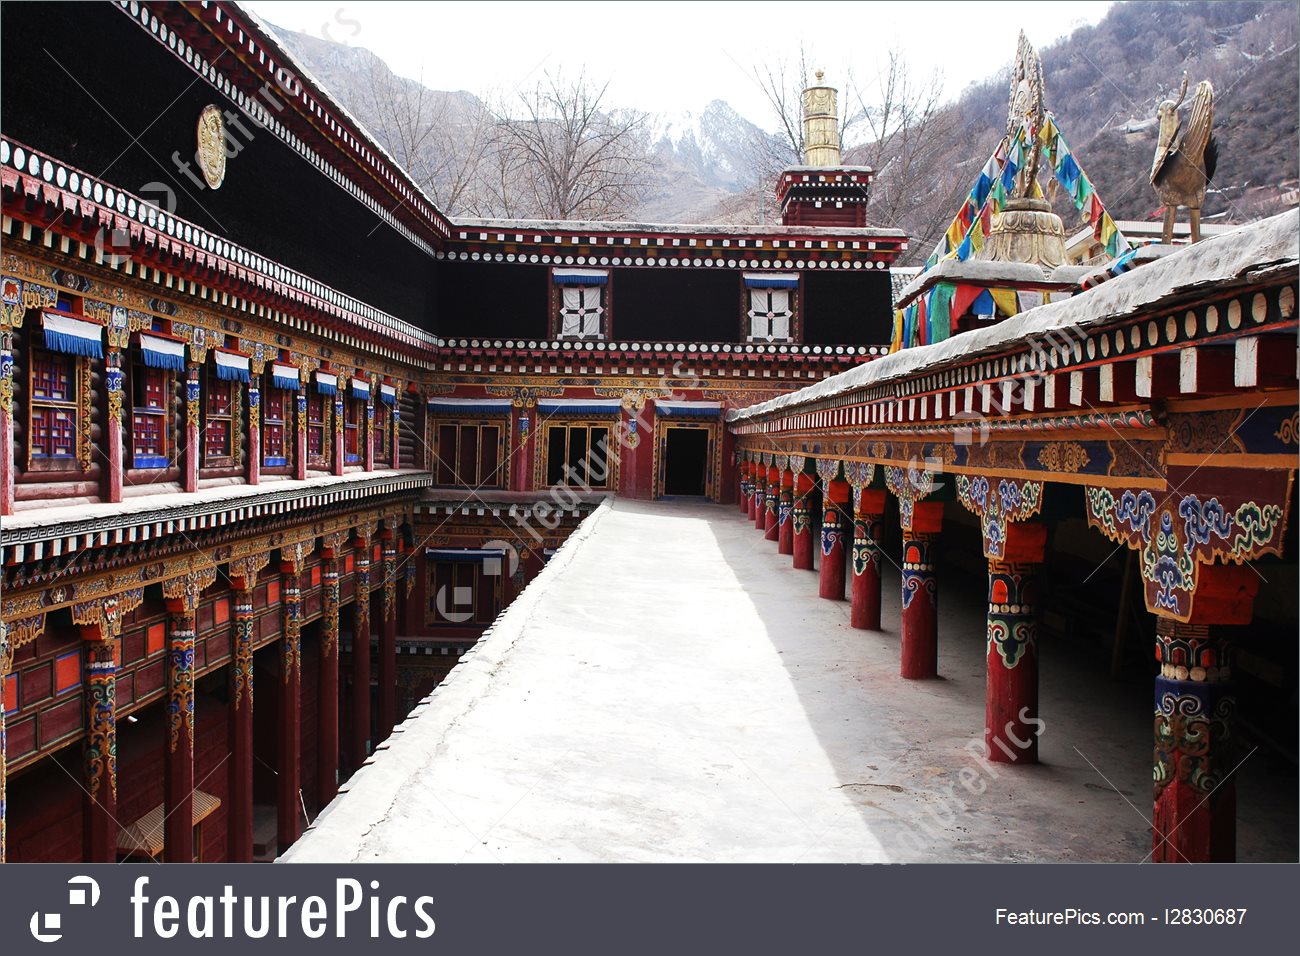 Religious Architecture: Interior view of a typical Tibetan lamasery